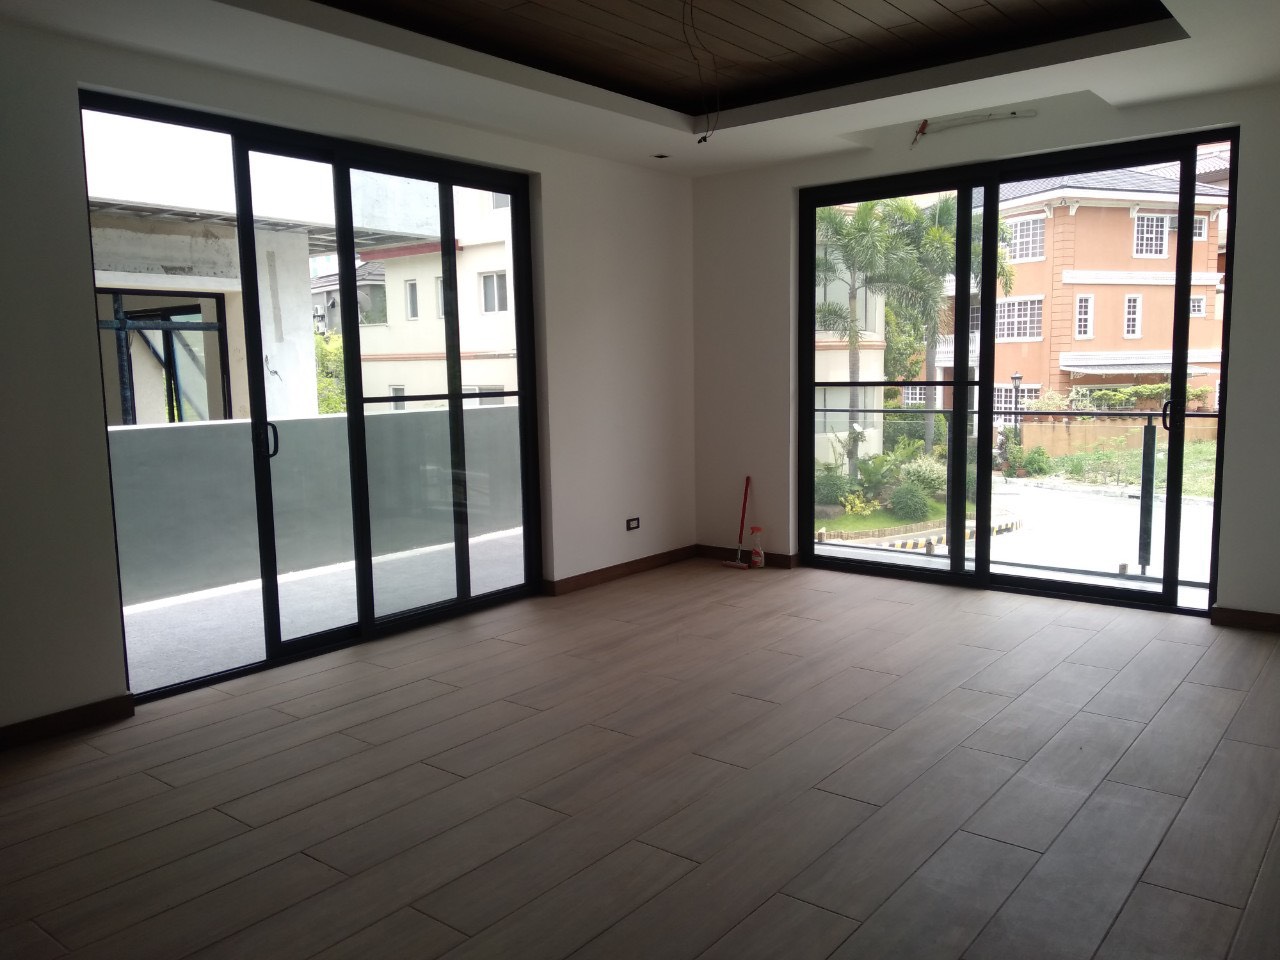 5BR House For Lease, McKinley Hill Village - 8